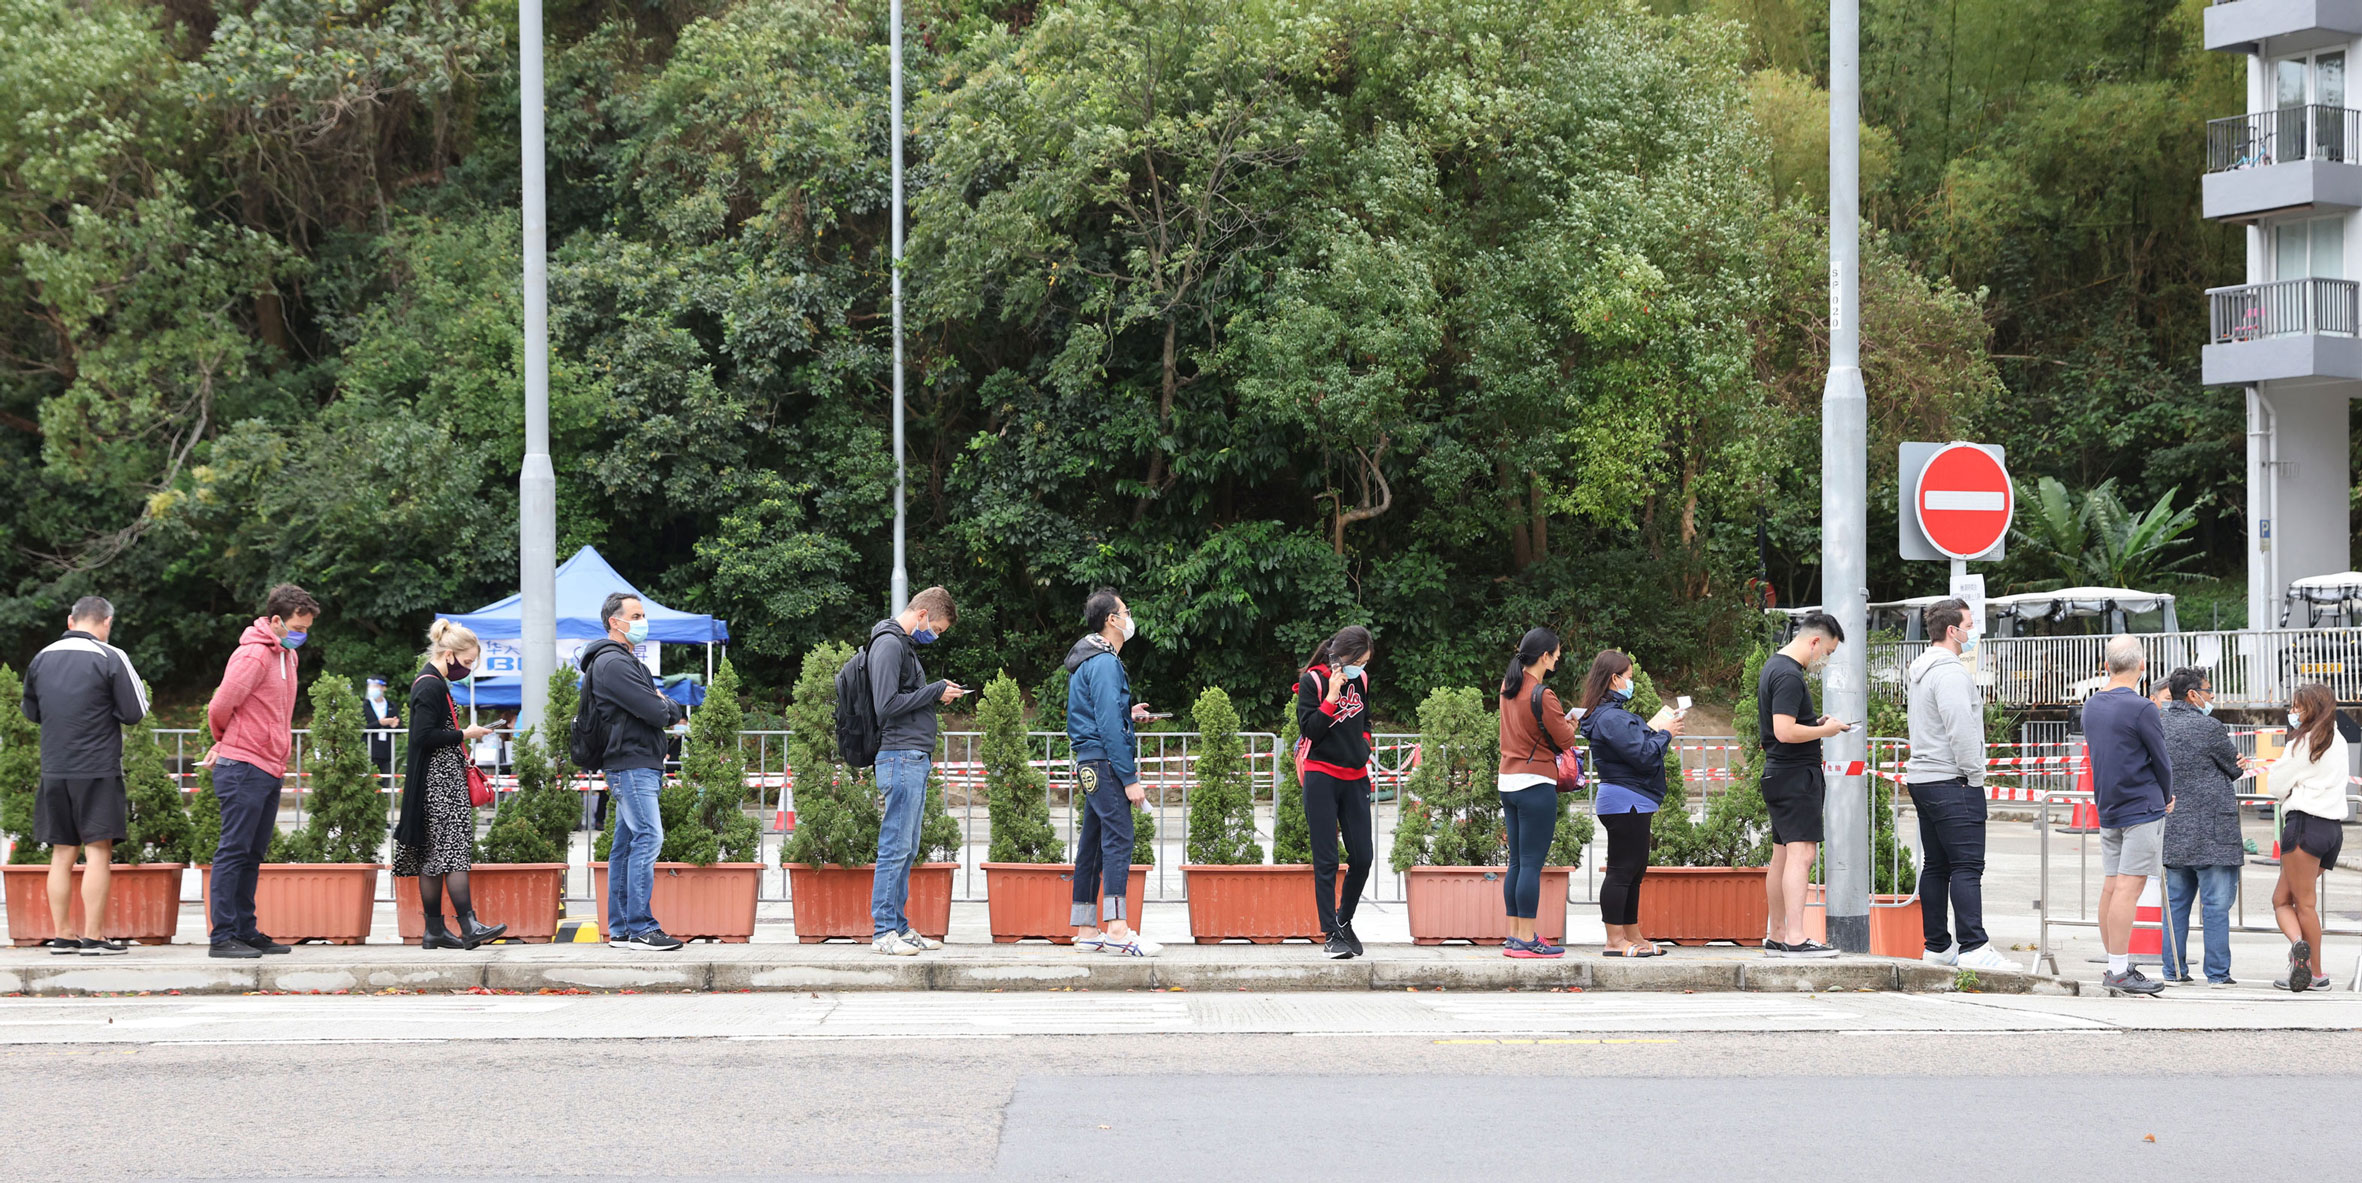 In this file photo, residents and workers of Discovery Bay subject to compulsory testing form a queue near the Discovery Bay Fire Station on Lantau Island, Hong Kong, on Nov. 2021